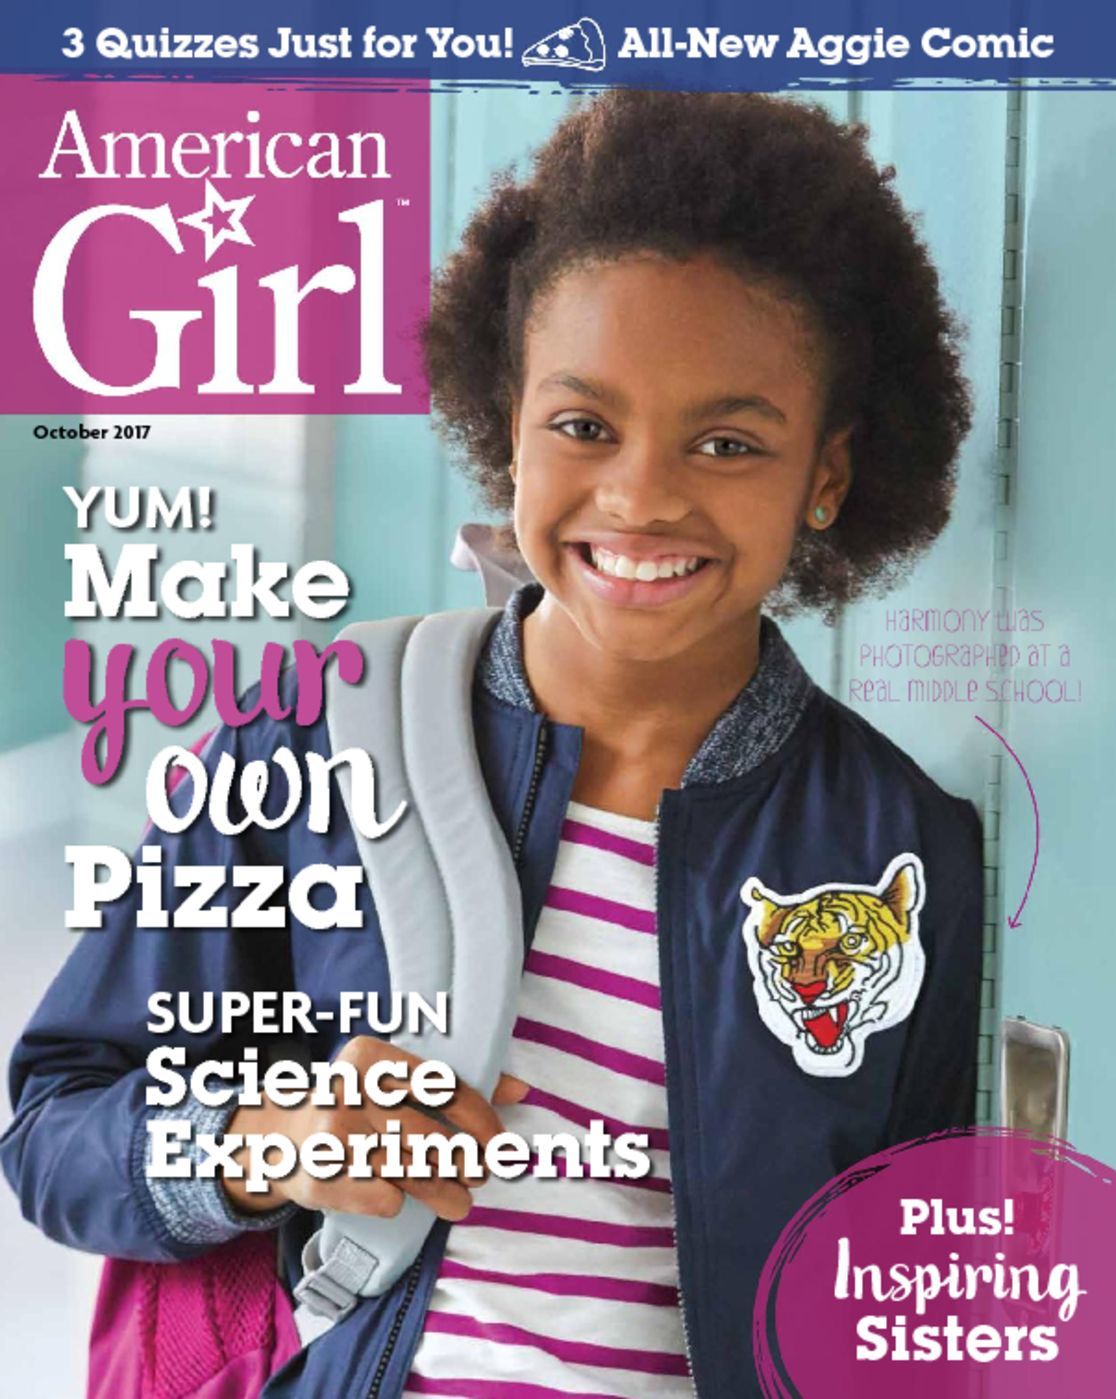 One Year Subscription To American Girl For 14 95 Through Tomorrow 10 5 Frugal Living Nw